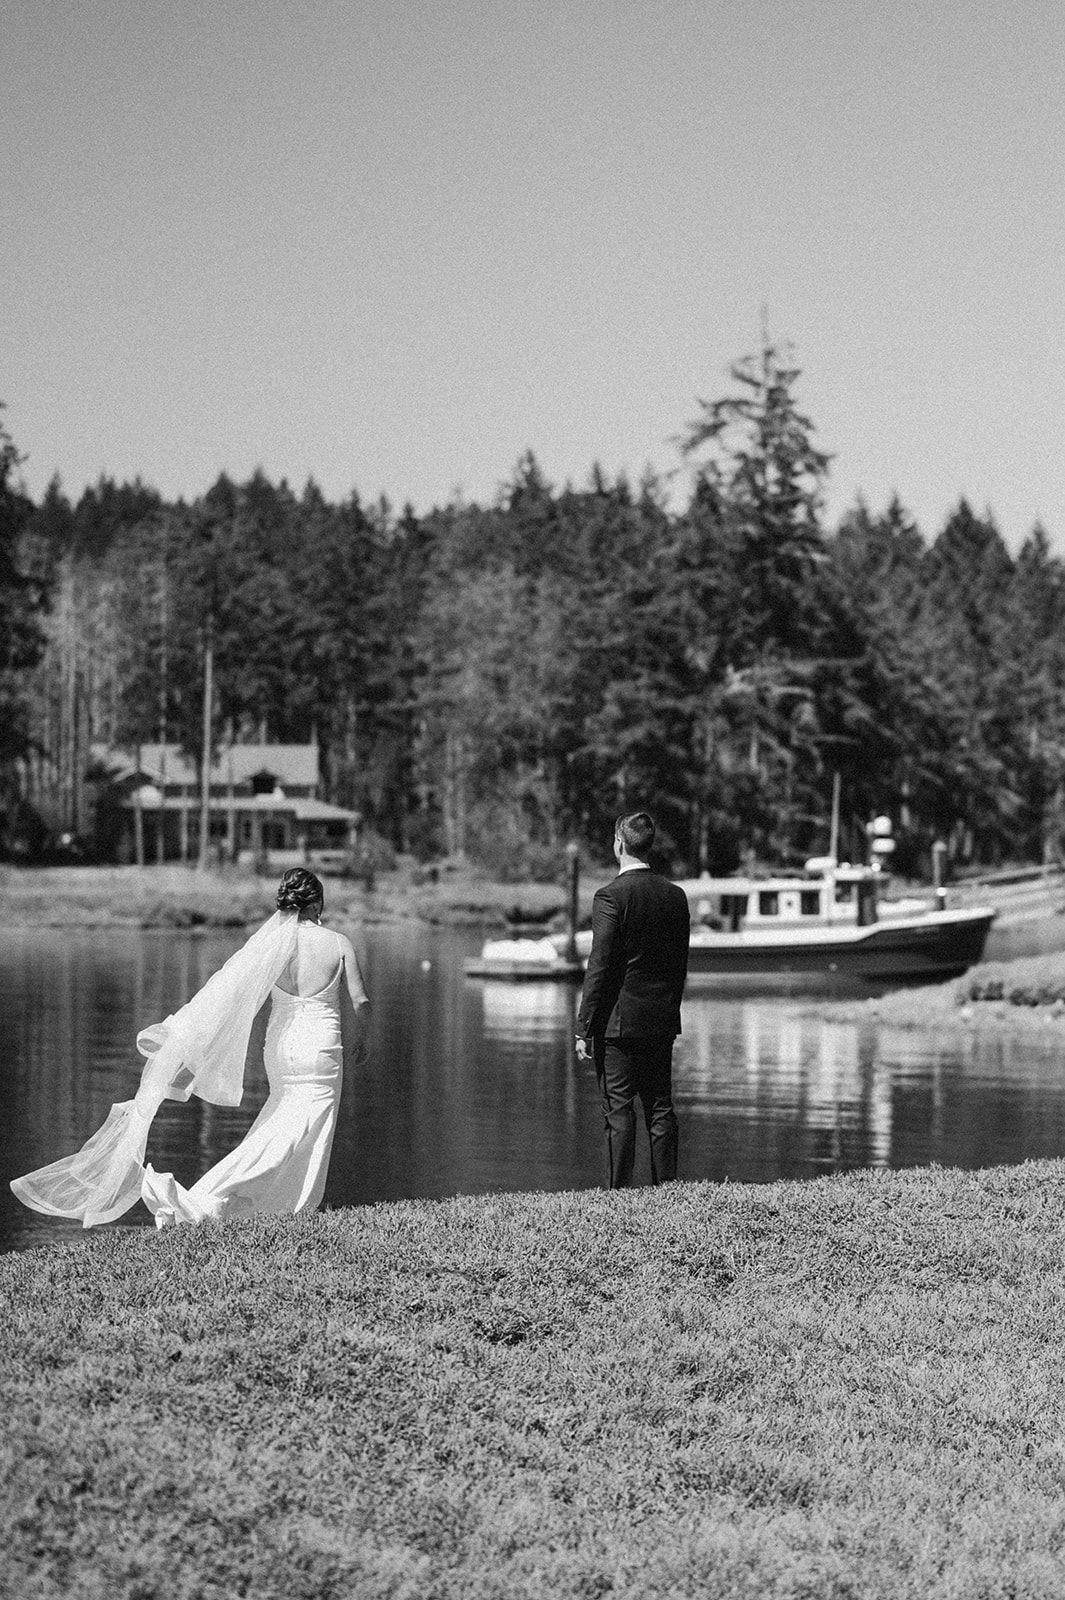 Getting married to your best friend on a private estate right outside of Seattle. Sounds perfect!